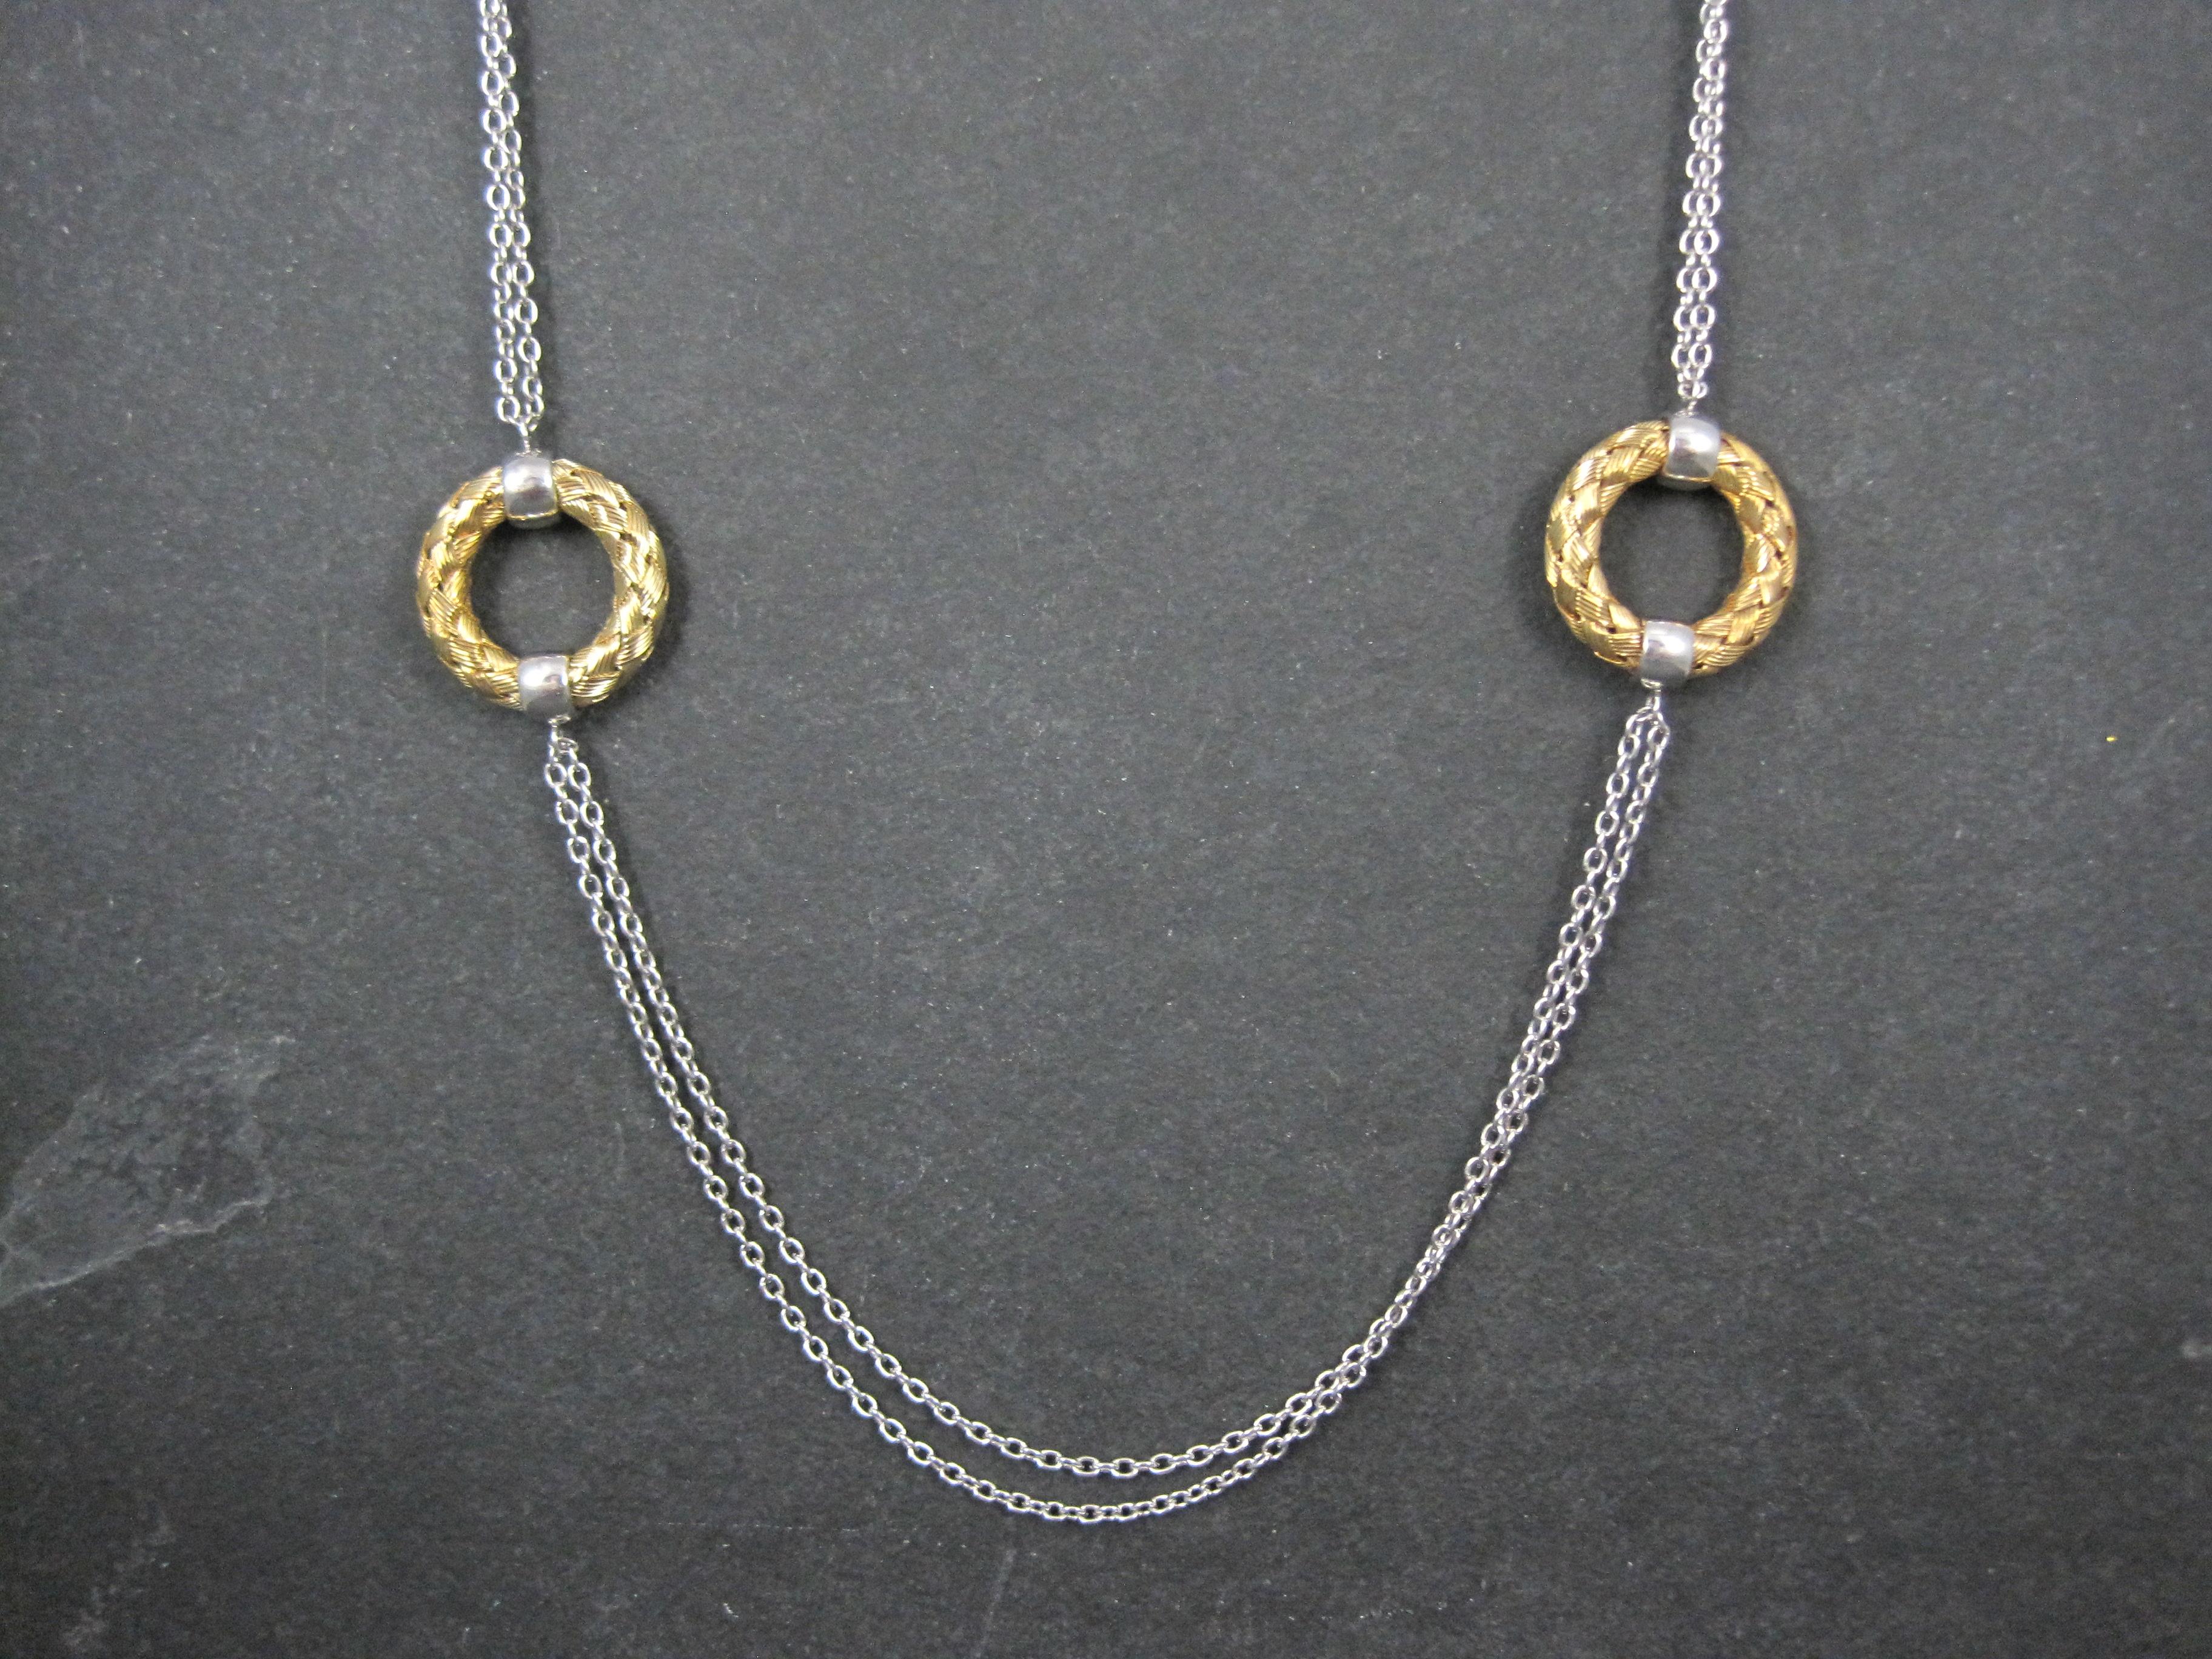 Chic 1 inch circles are stationed along this contemporary necklace by The Fifth Season by Roberto Coin.

Designed in a combination of 18k gold vermeil and sterling silver, this necklace is 39 inches and can be styled in a multitude of ways.
Weight: